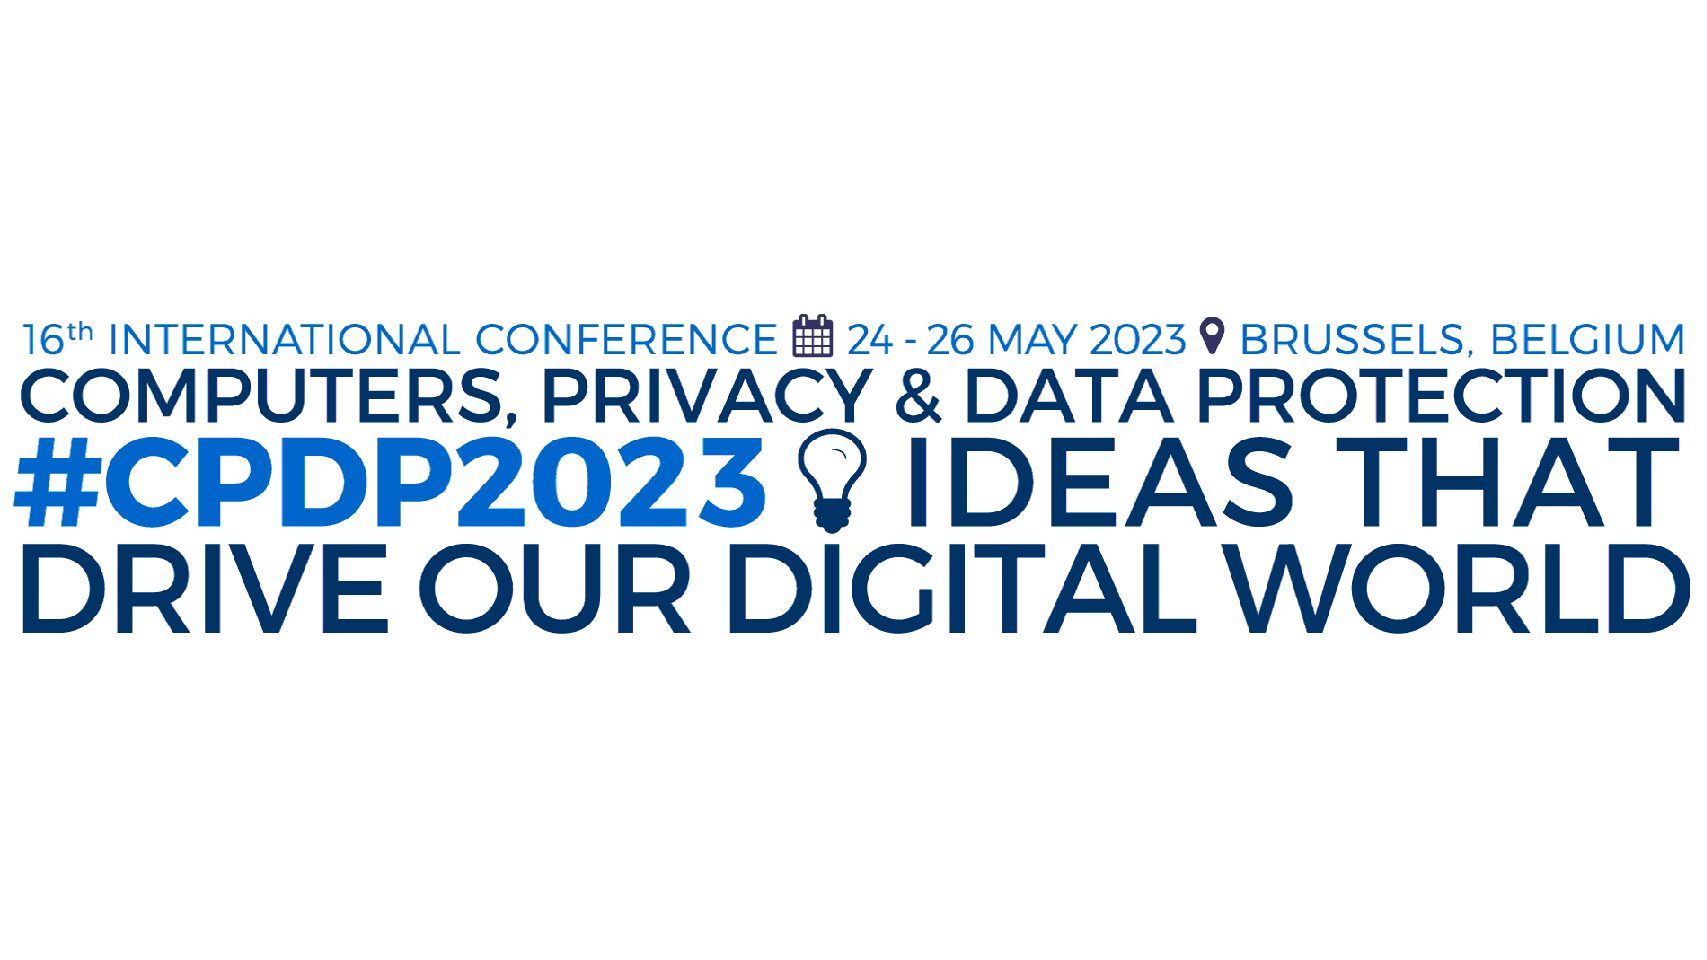 CPDP 2023 | Ideas that drive our digital world